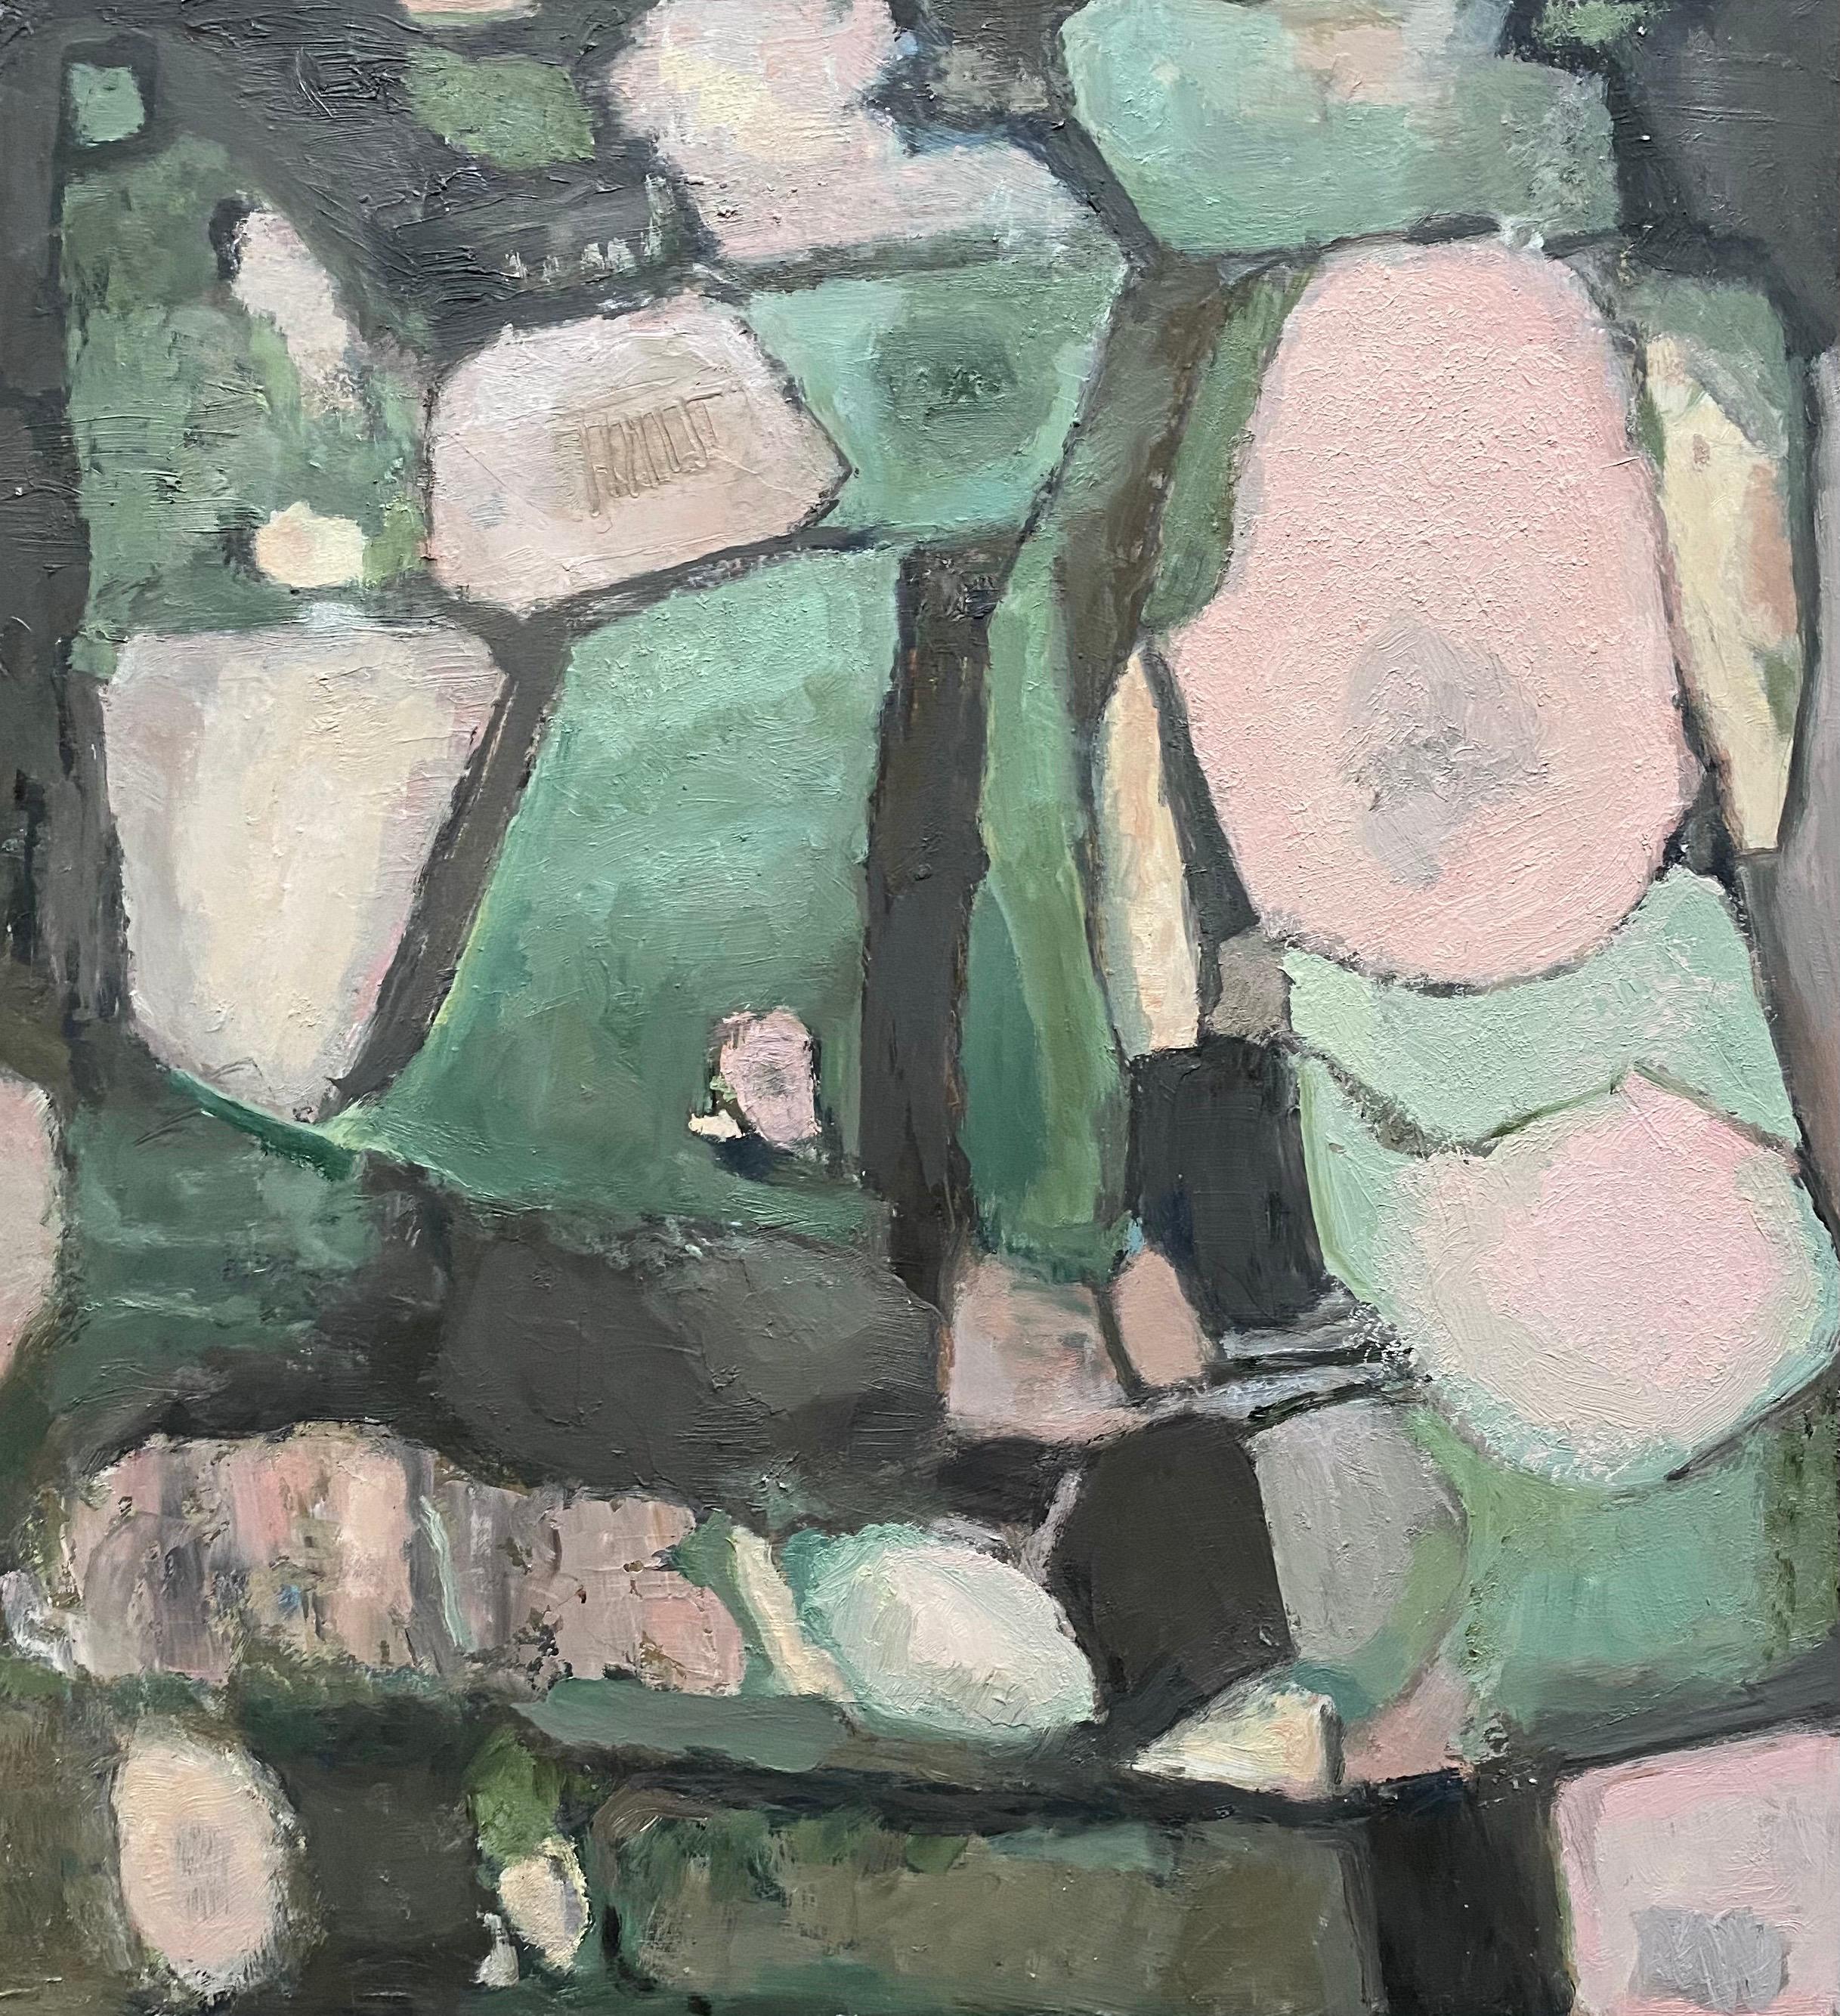 CONTEMPORARY FRENCH CUBIST ABSTRACT PAINTING - GREEN PINKS SHADES OF COLOR